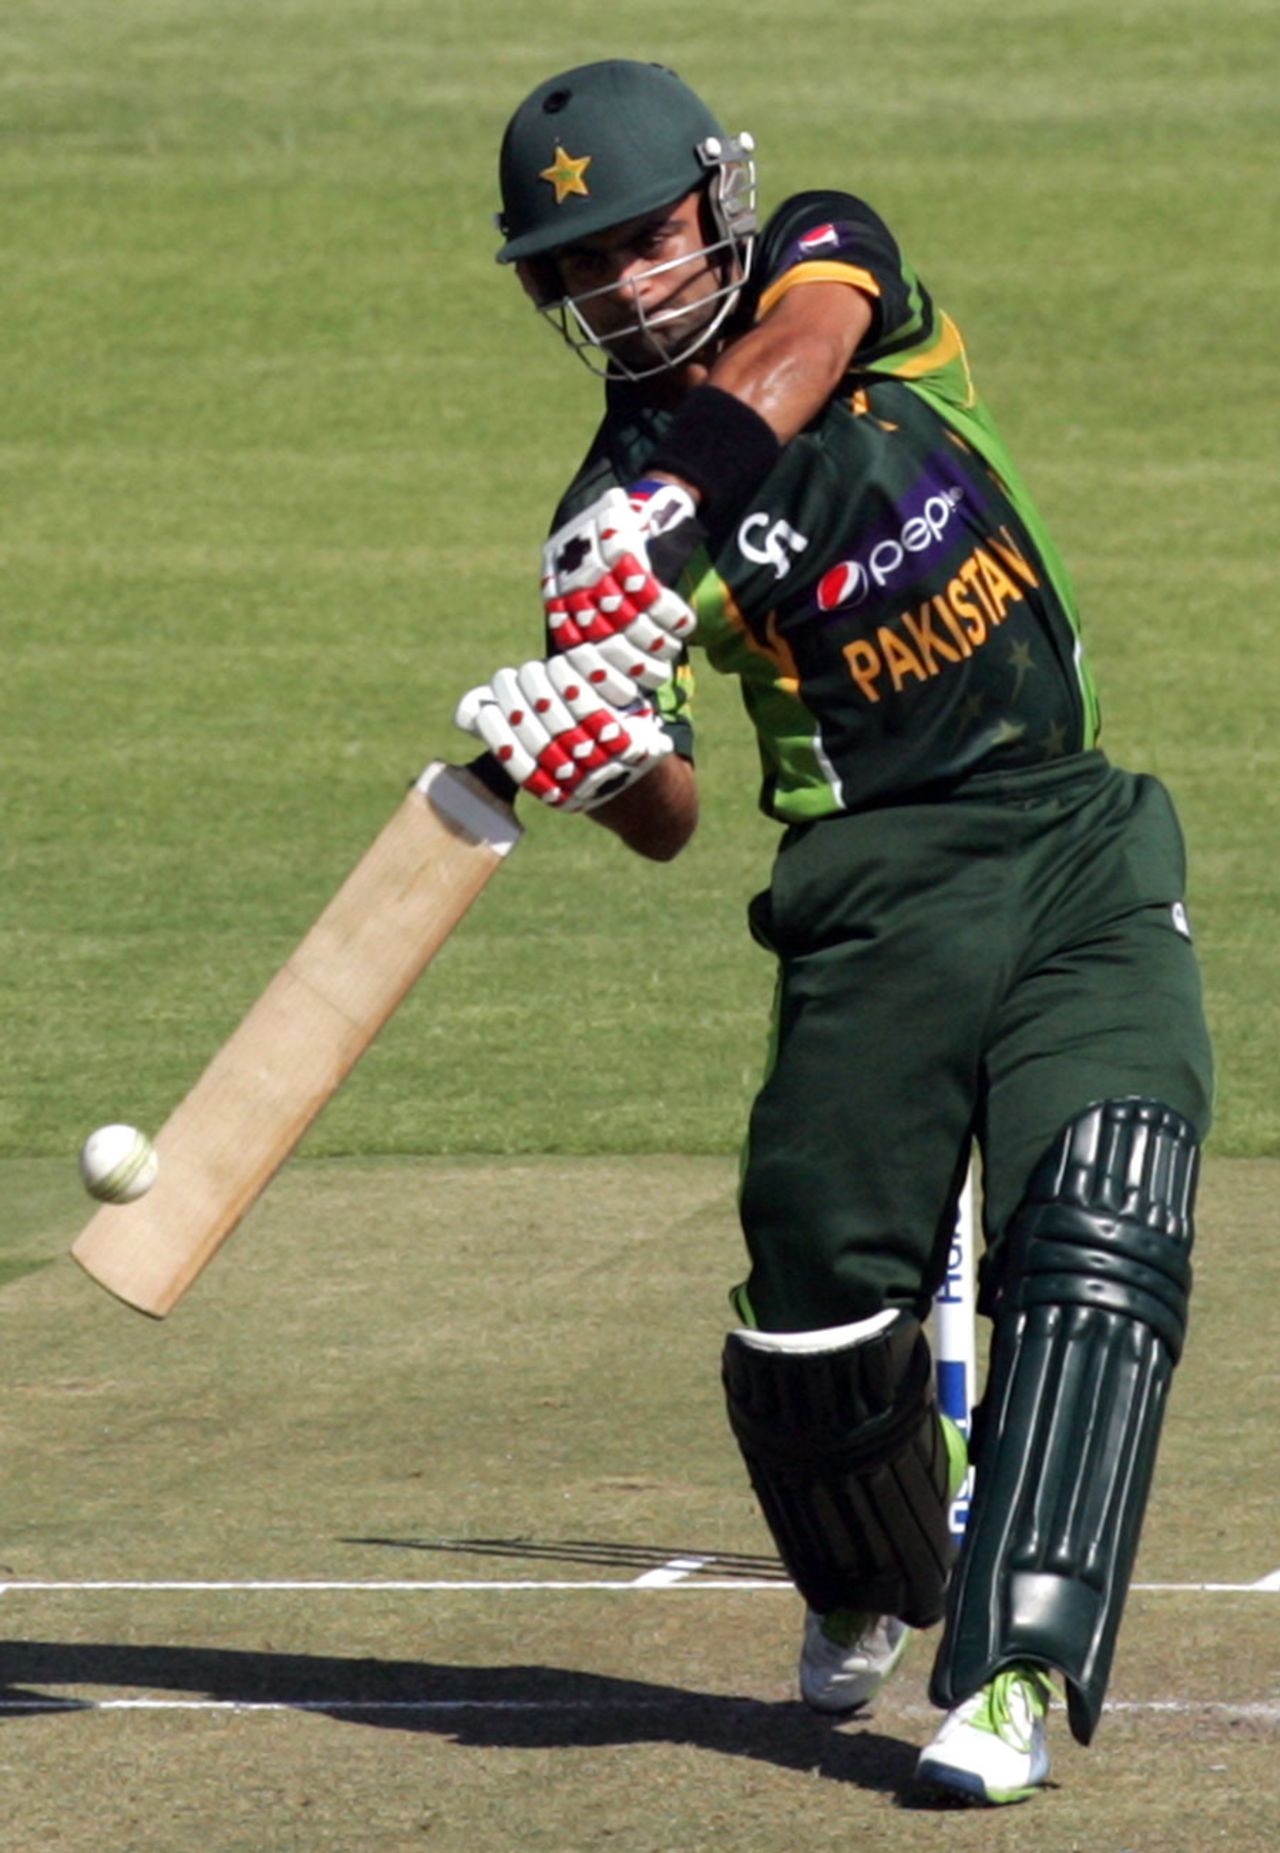 Ahmed Shehzad sets up to hit the ball over the top, Zimbabwe v Pakistan, 2nd T20I, Harare, August 24, 2013